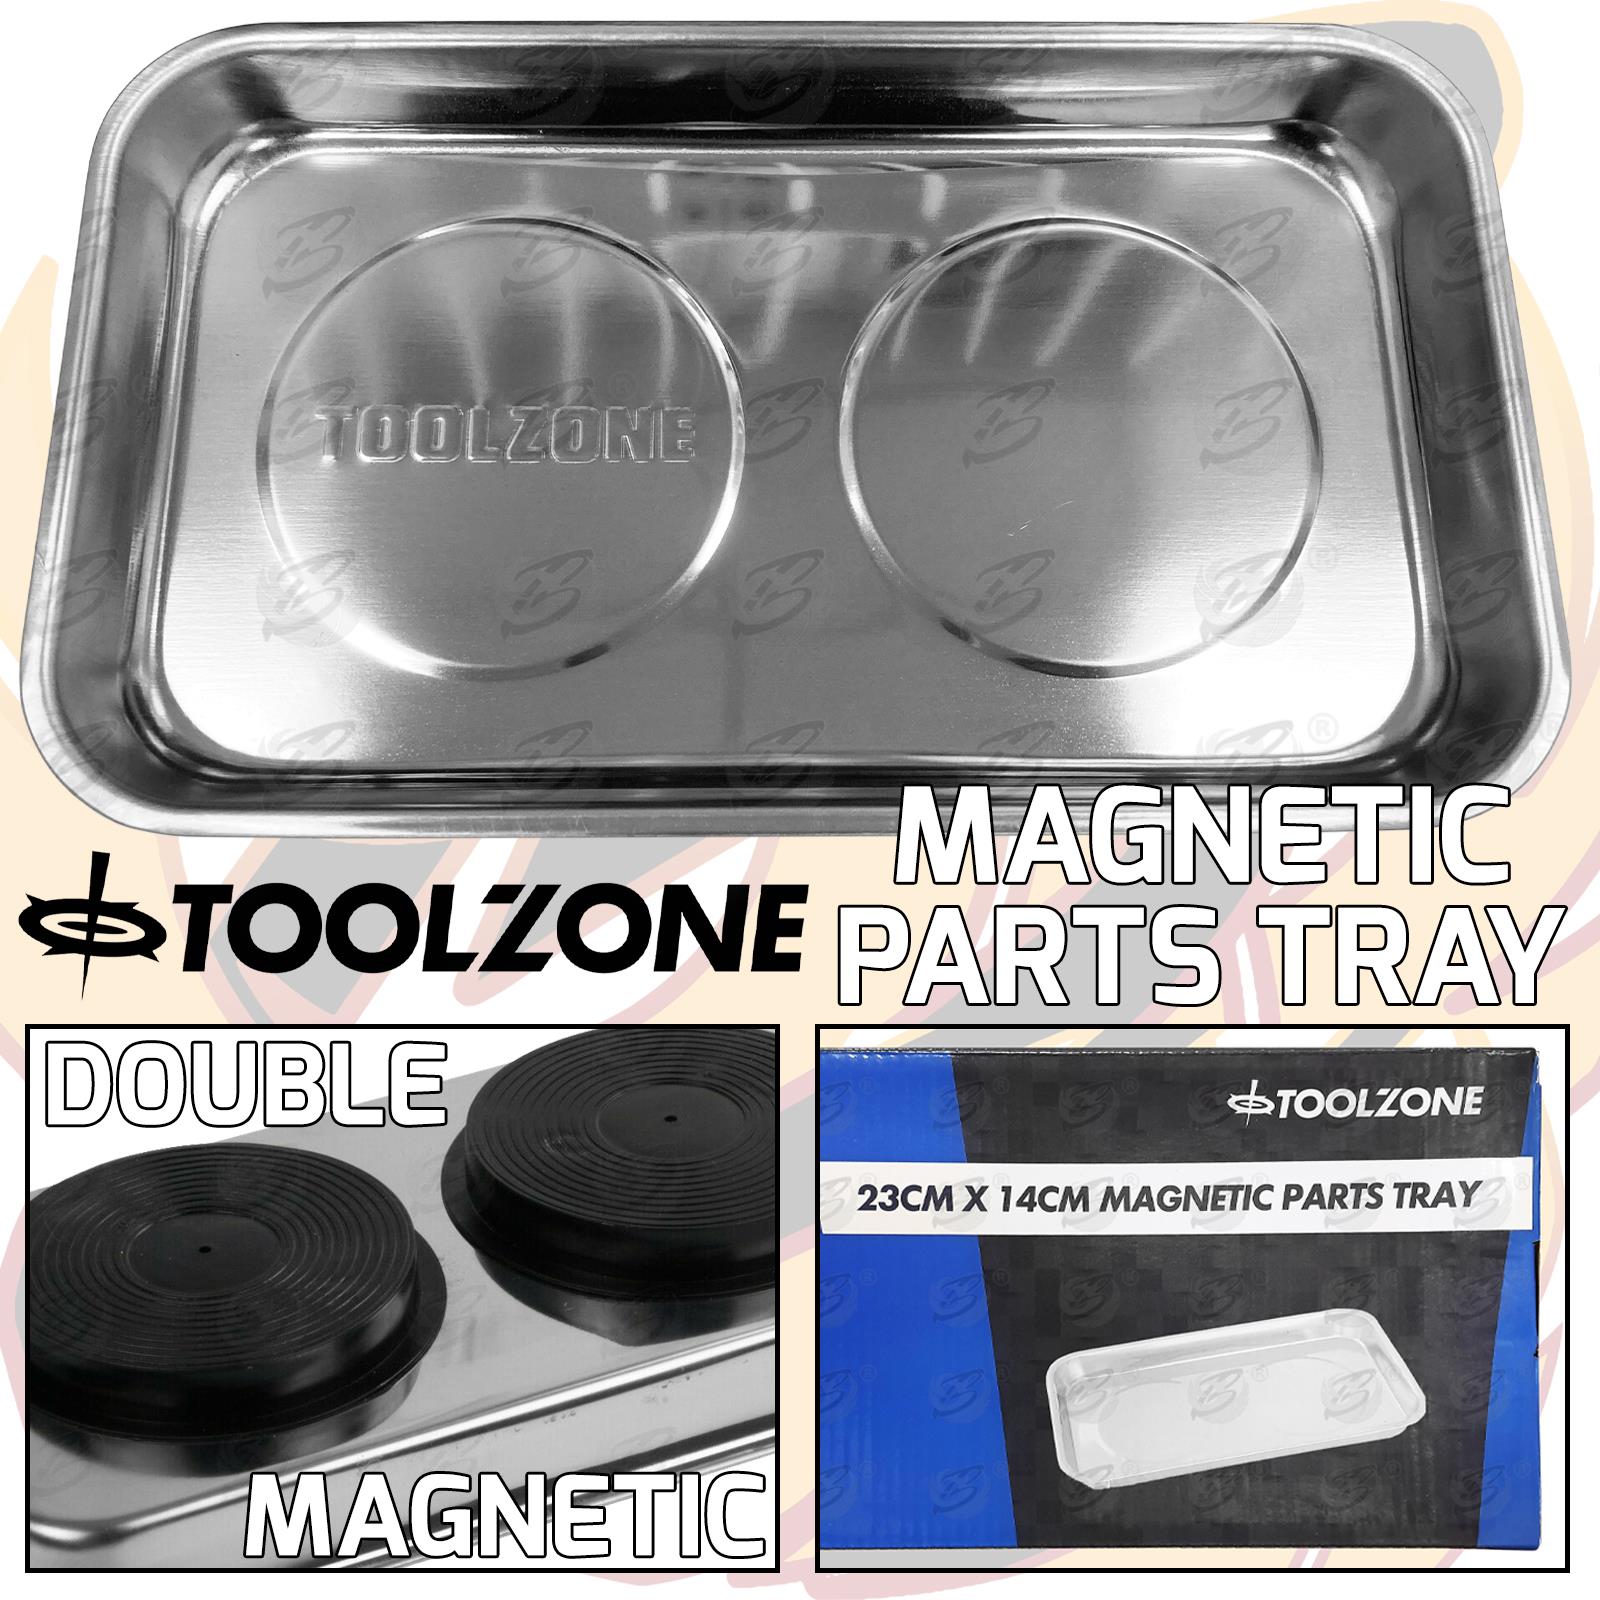 TOOLZONE DOUBLE MAGNETIC PARTS TRAY